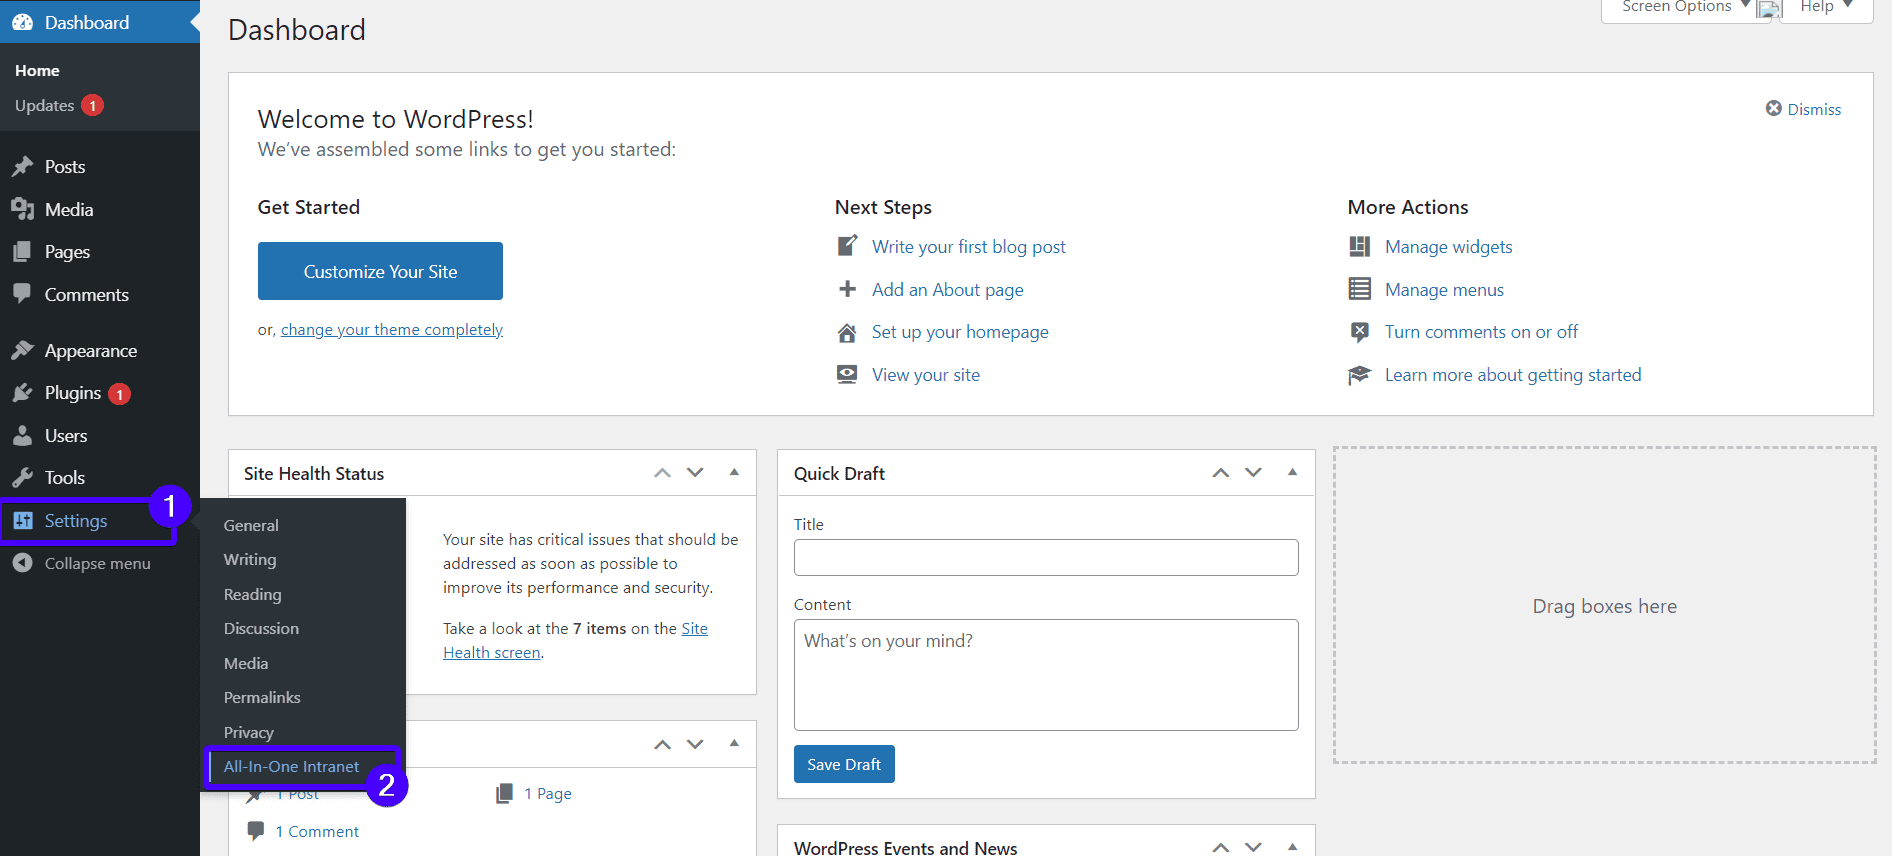 Settings - All-in-one Intranet